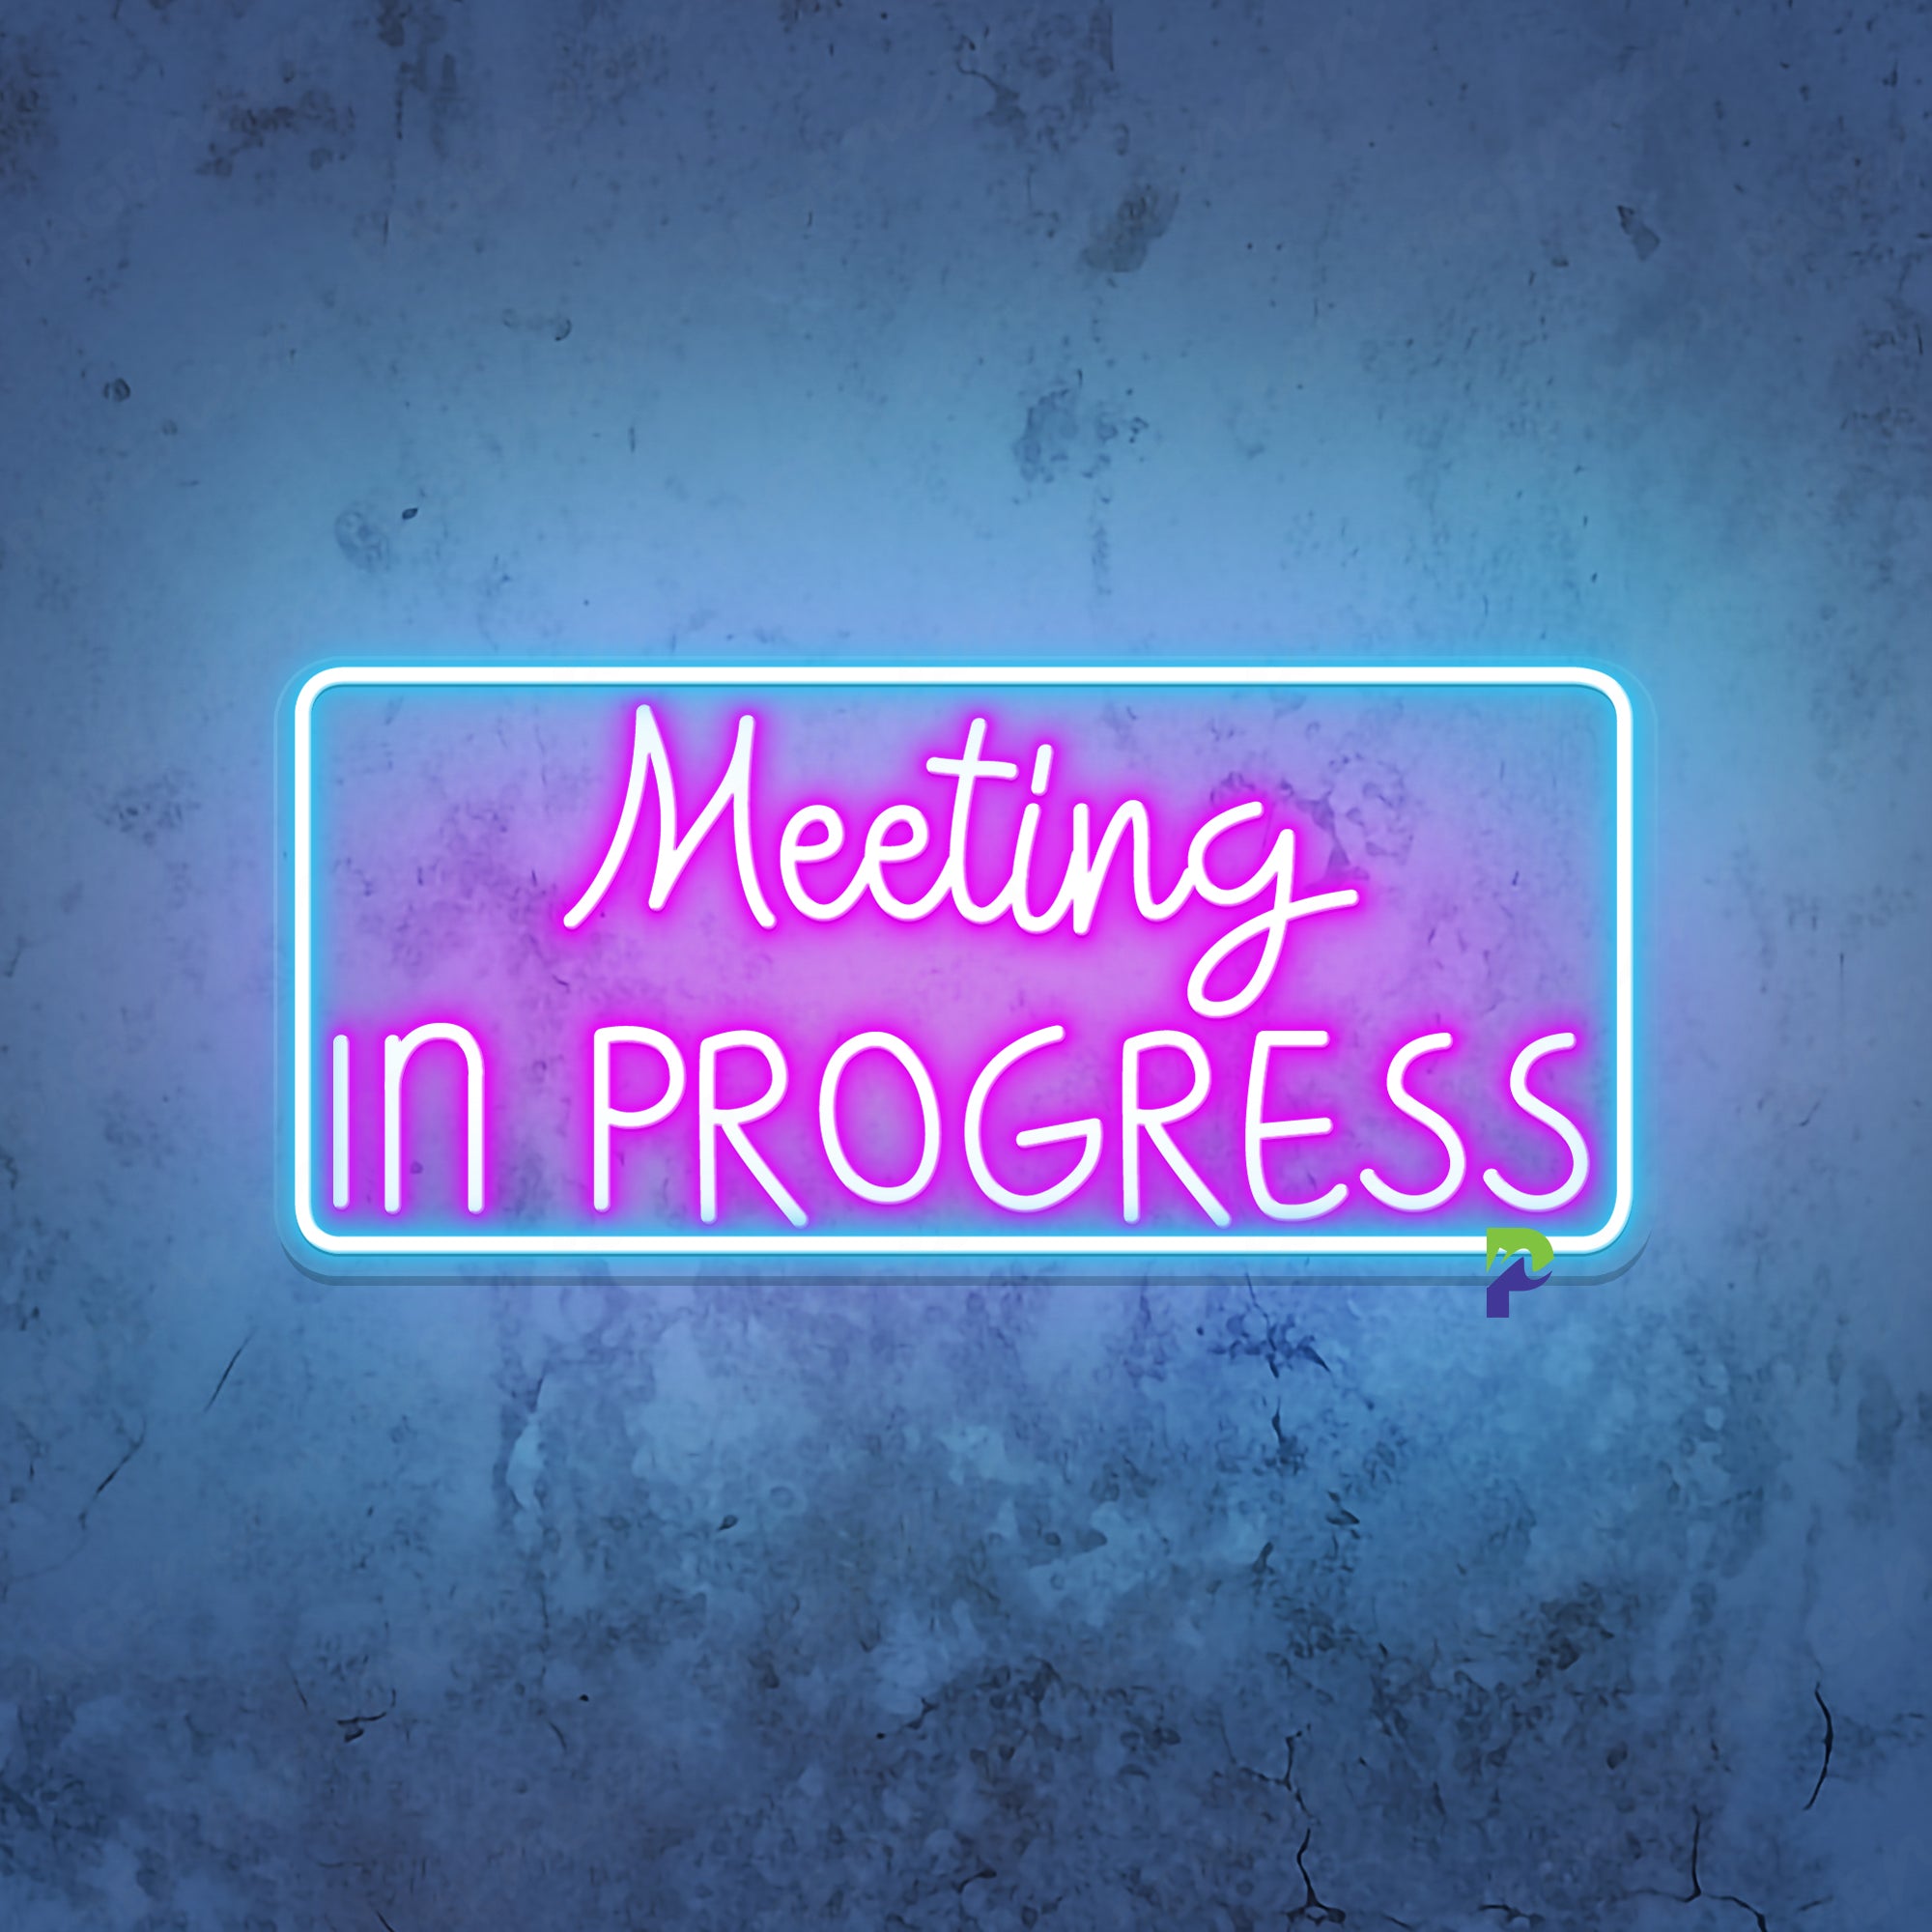 Meeting In Progress Neon Sign Friendly Notice Led Light